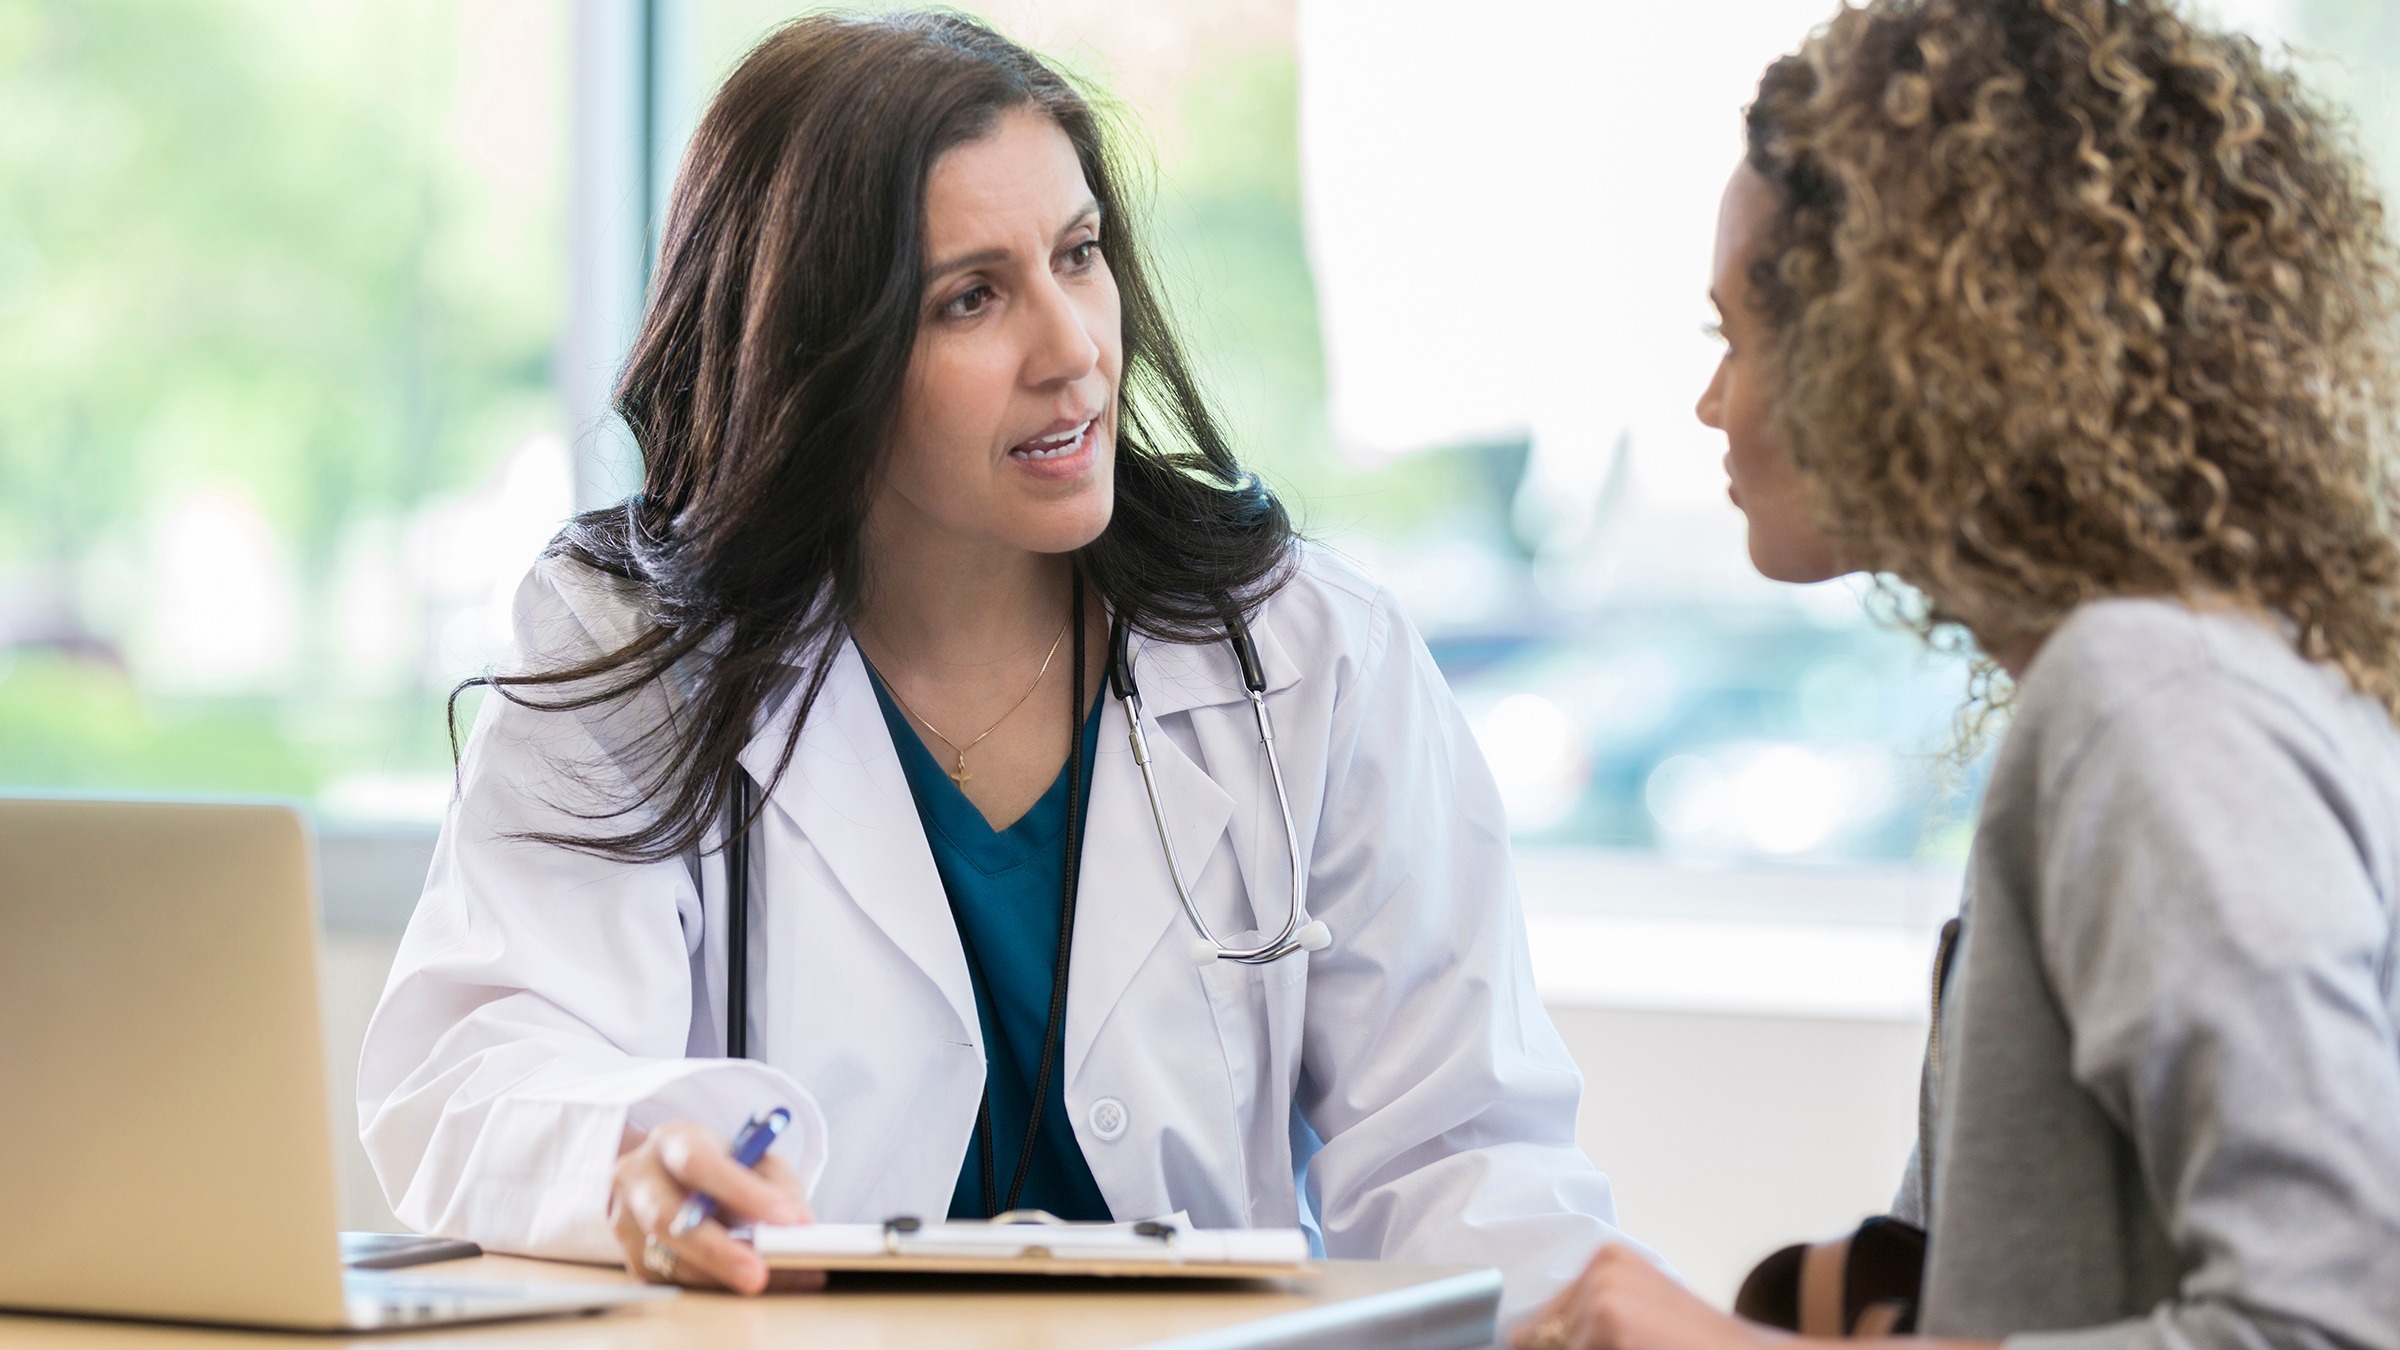 Young woman with curly hair speaking with her doctor. The doctor has a clipboard and pen and is taking notes.
SDI Productions/E+ via Getty Images
